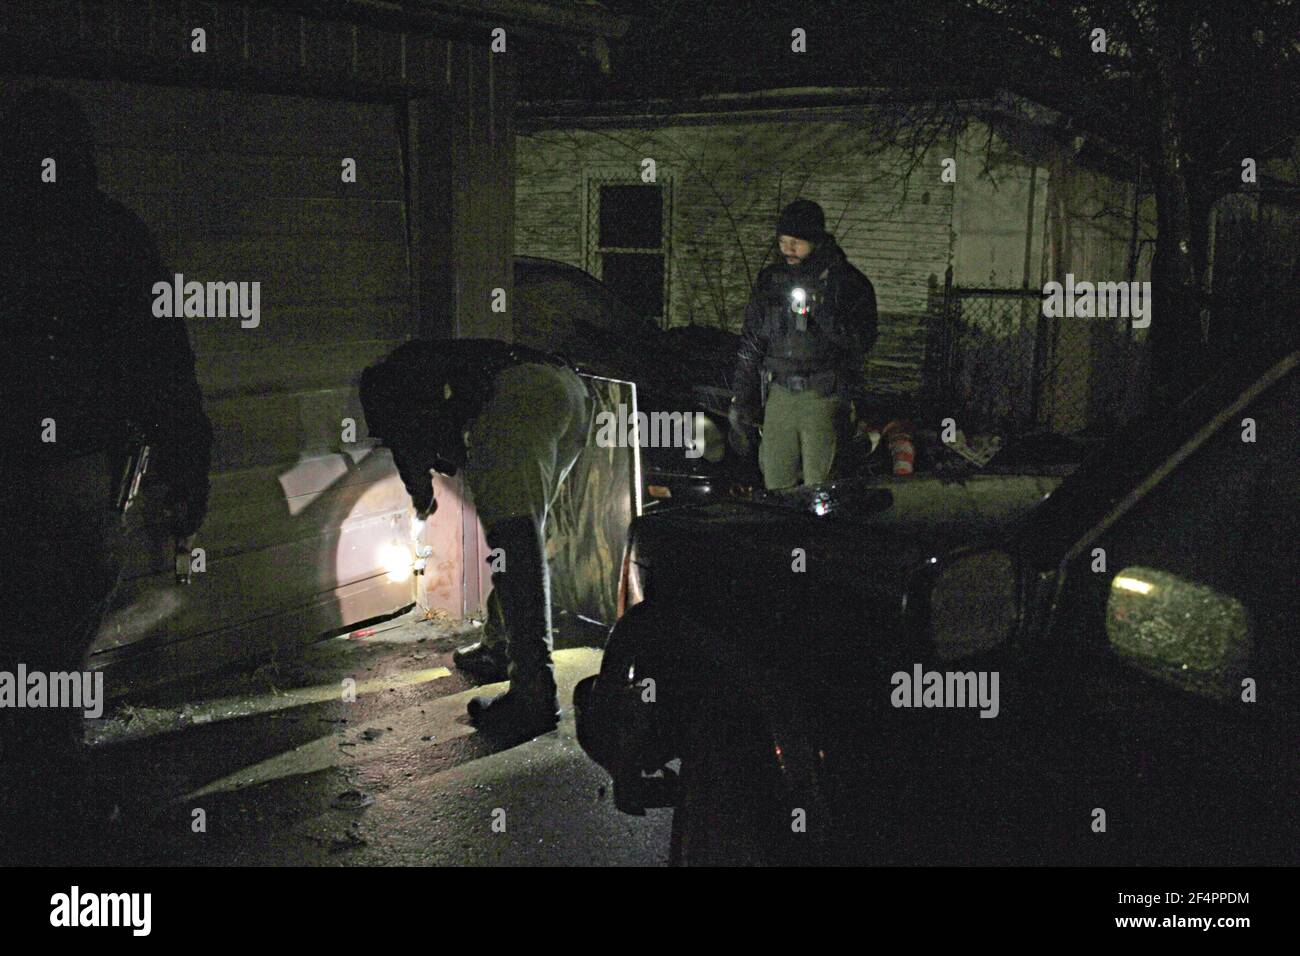 Police officers search the back yard of a building at night, Detroit, Michigan, USA Stock Photo